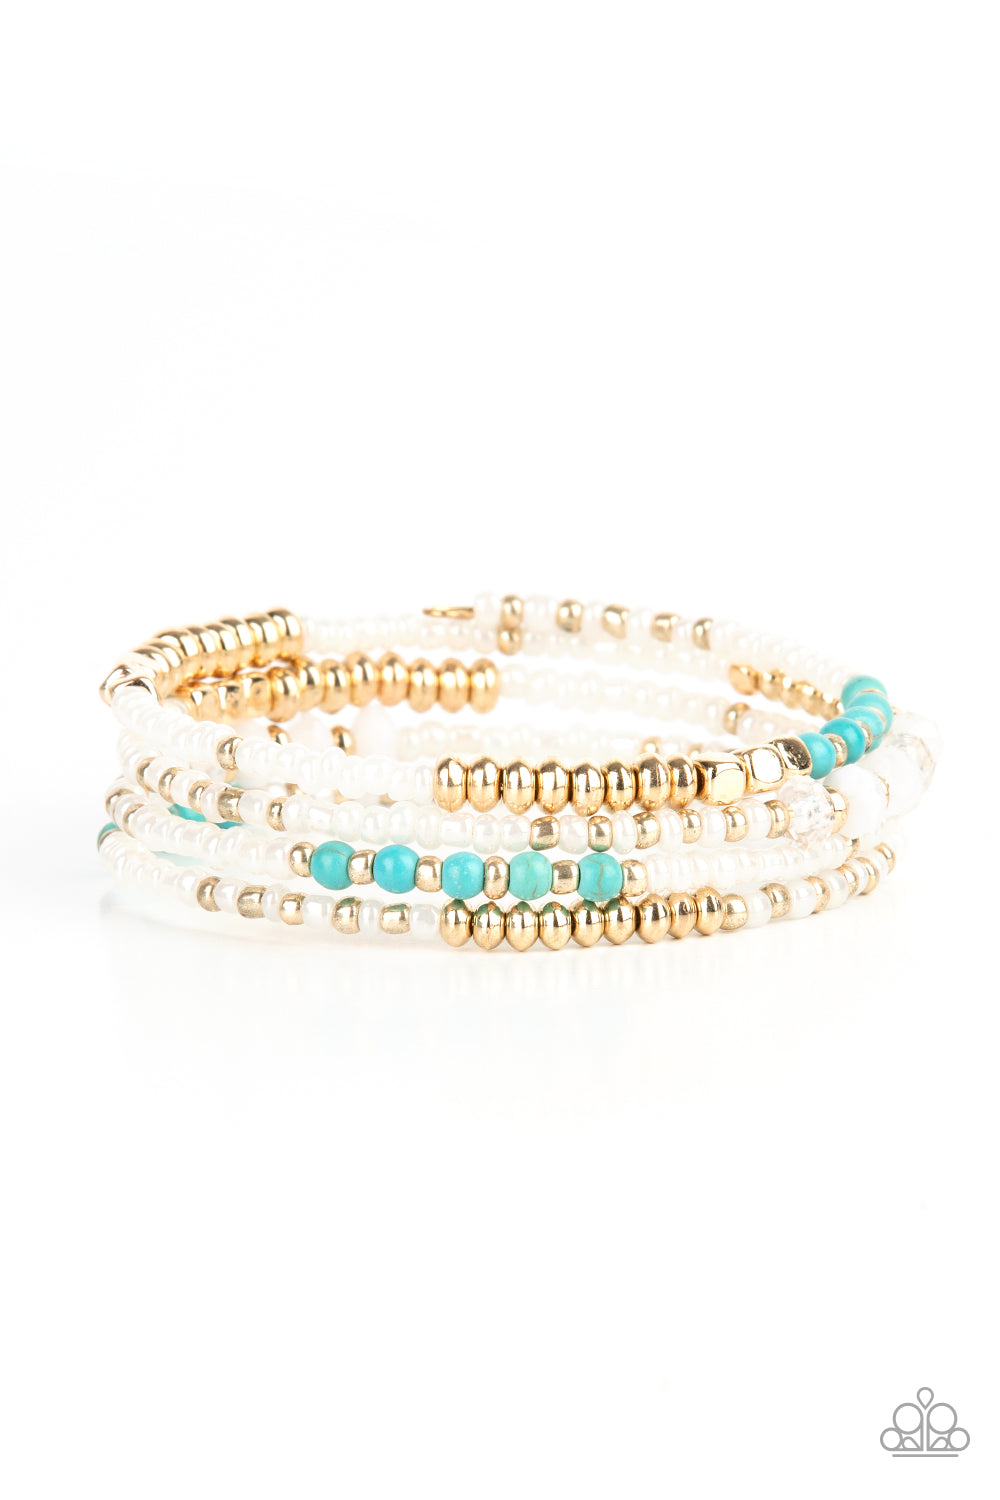 Infinitely Dreamy Gold Bracelet - Paparazzi Accessories  Sections of pearly white seed beads alternate with gold, turquoise, and crystal-like beads in infinite rows. The dreamy colors are threaded along a continuous strand of wire for an infinity wrap-style bracelet around the wrist.  All Paparazzi Accessories are lead free and nickel free!   Sold as one individual bracelet.